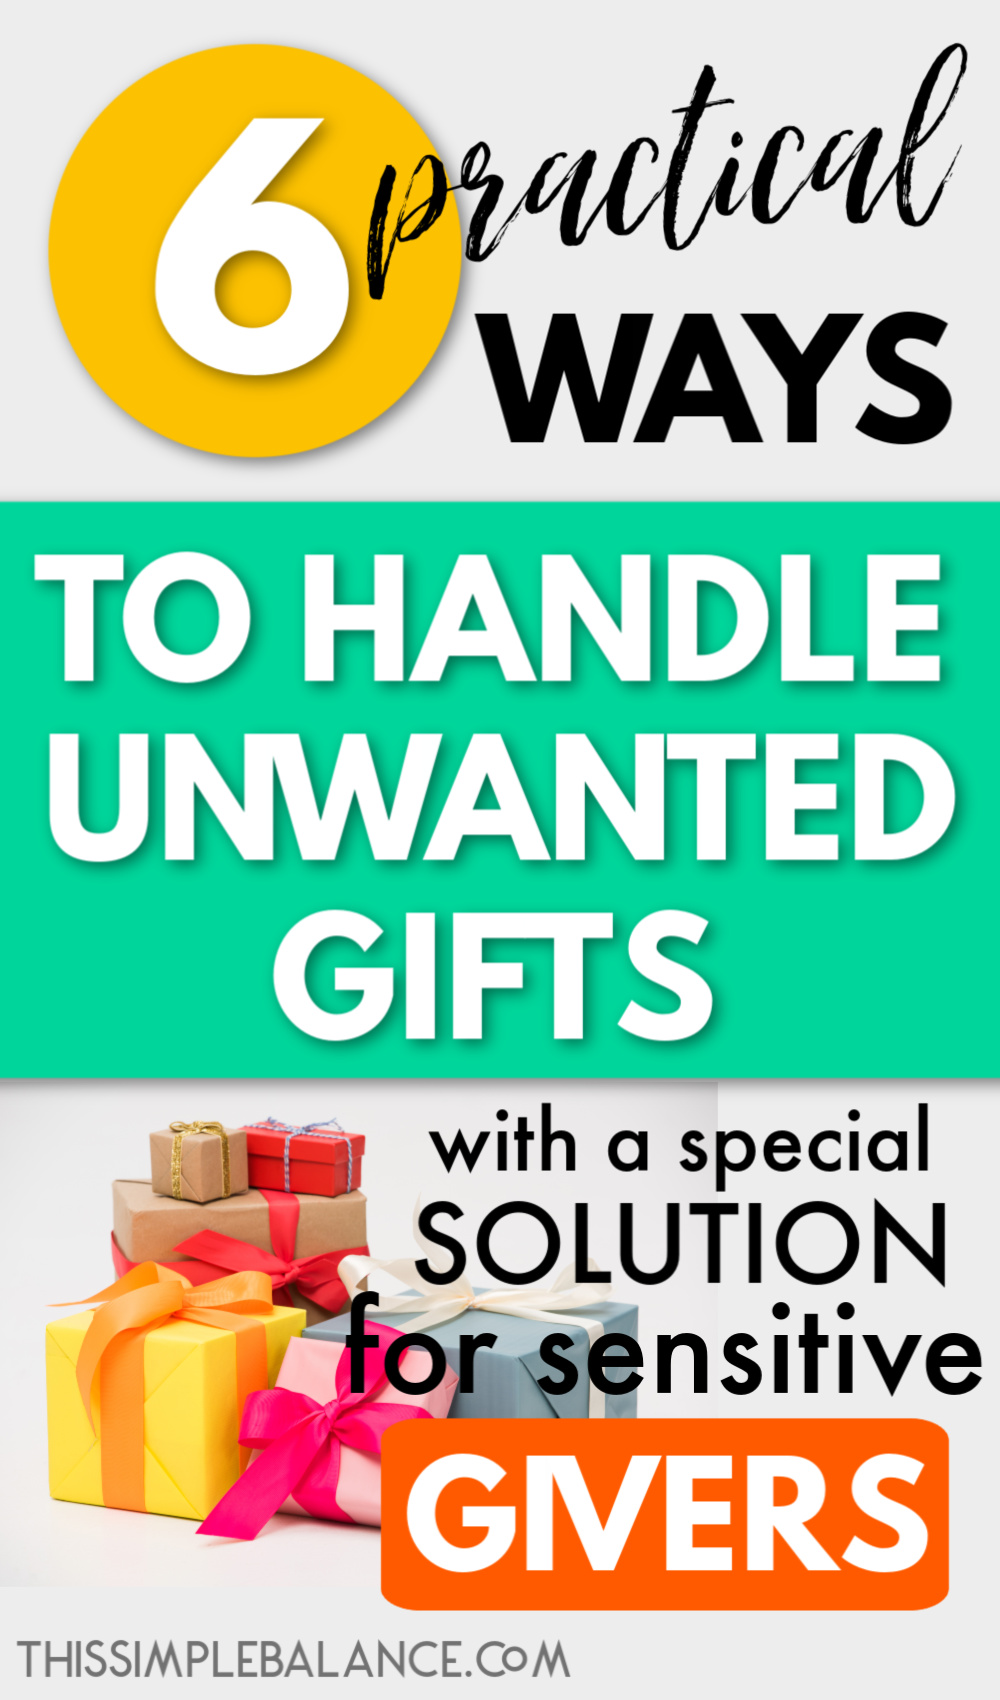 pile of wrapped gifts with colorful bows, with text overlay, "6 practical ways to handle unwanted gifts with a special solution for sensitive givers"